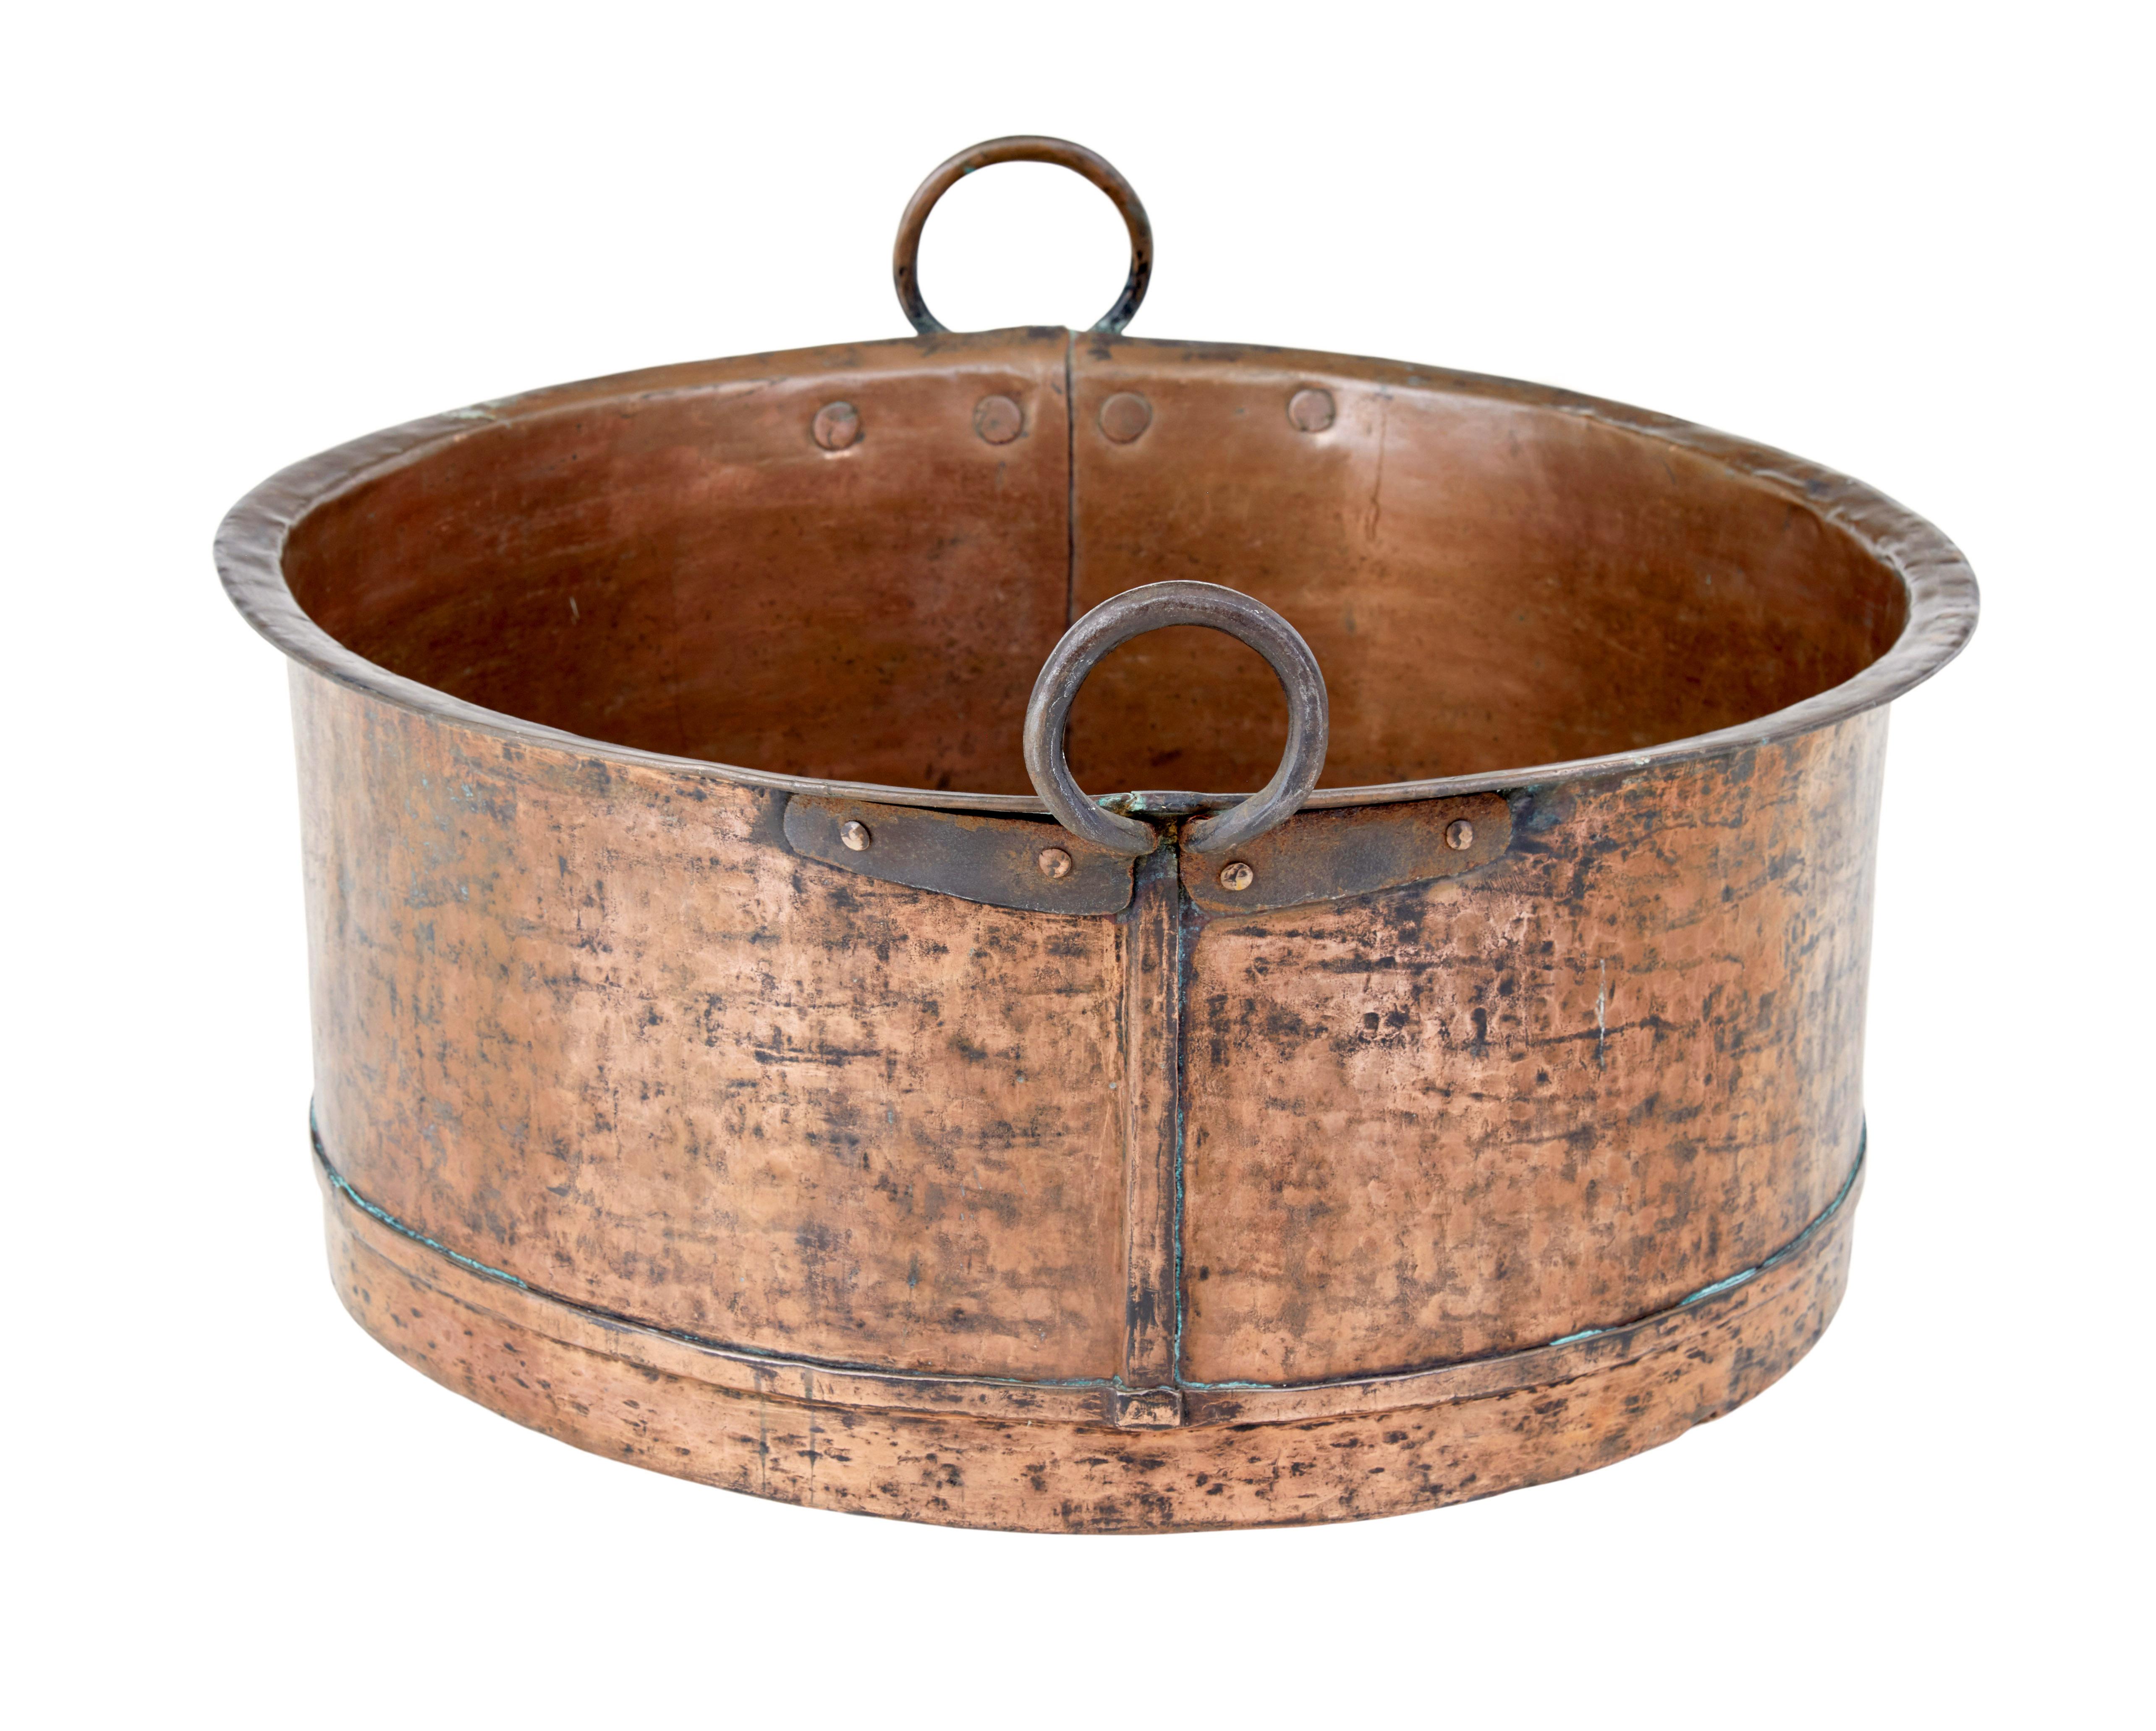 19th century copper cooking vessel circa 1846.

Good quality circular copper pot with rounded bottom.   Hand riveted iron work loop handles.  Fine original colour and patina.  Date stamped on the side.

Ideal for use today as a log bin or for